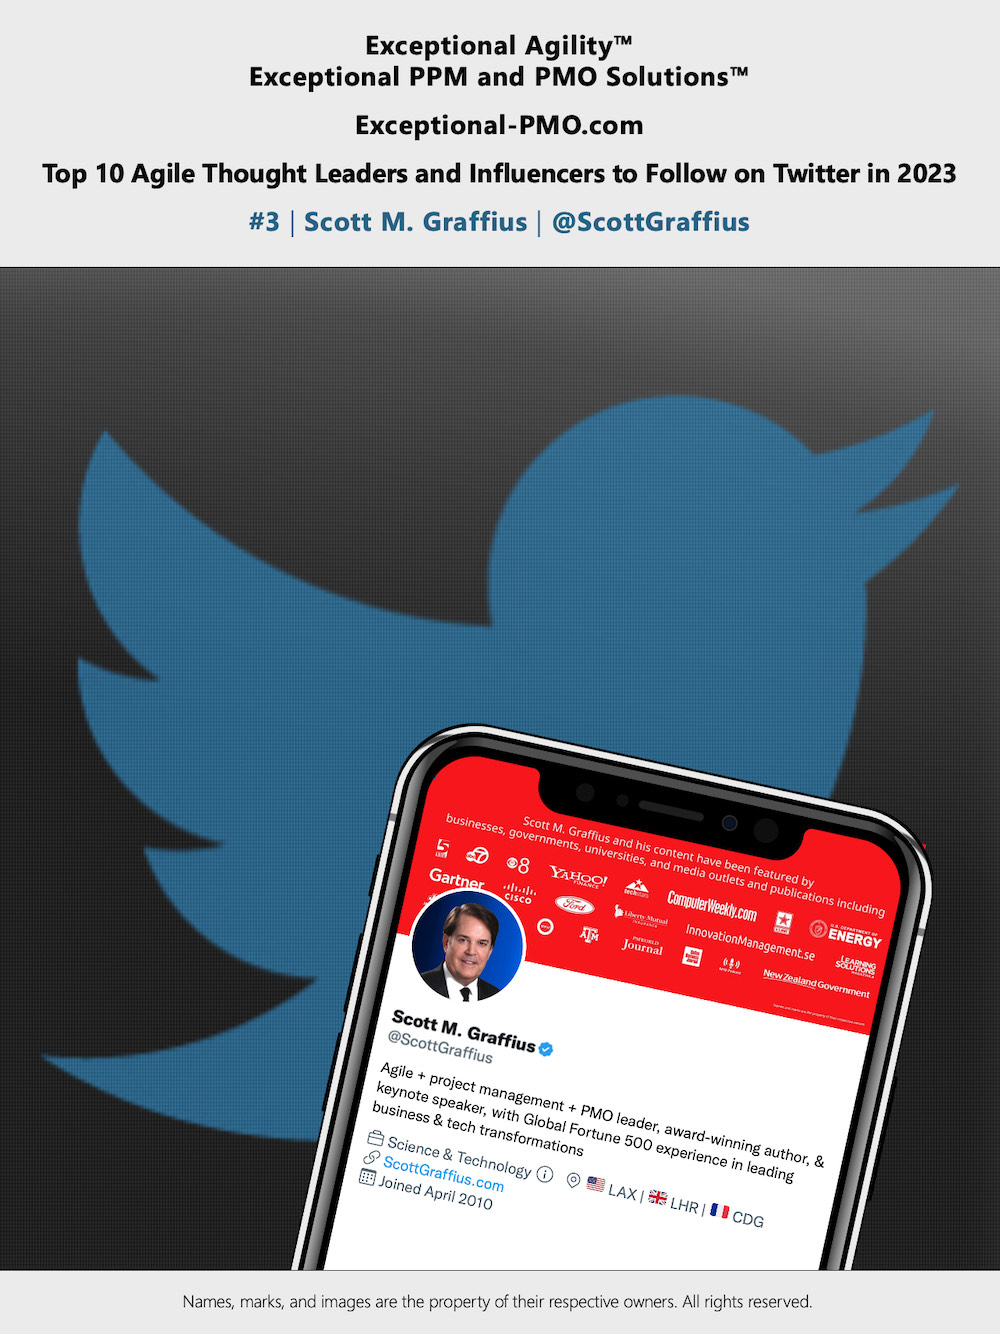 Exceptional-PMO_com - Top 10 Agile Thought Leaders and Influencers to Follow on Twitter in 2023 - 03 - lr - sq